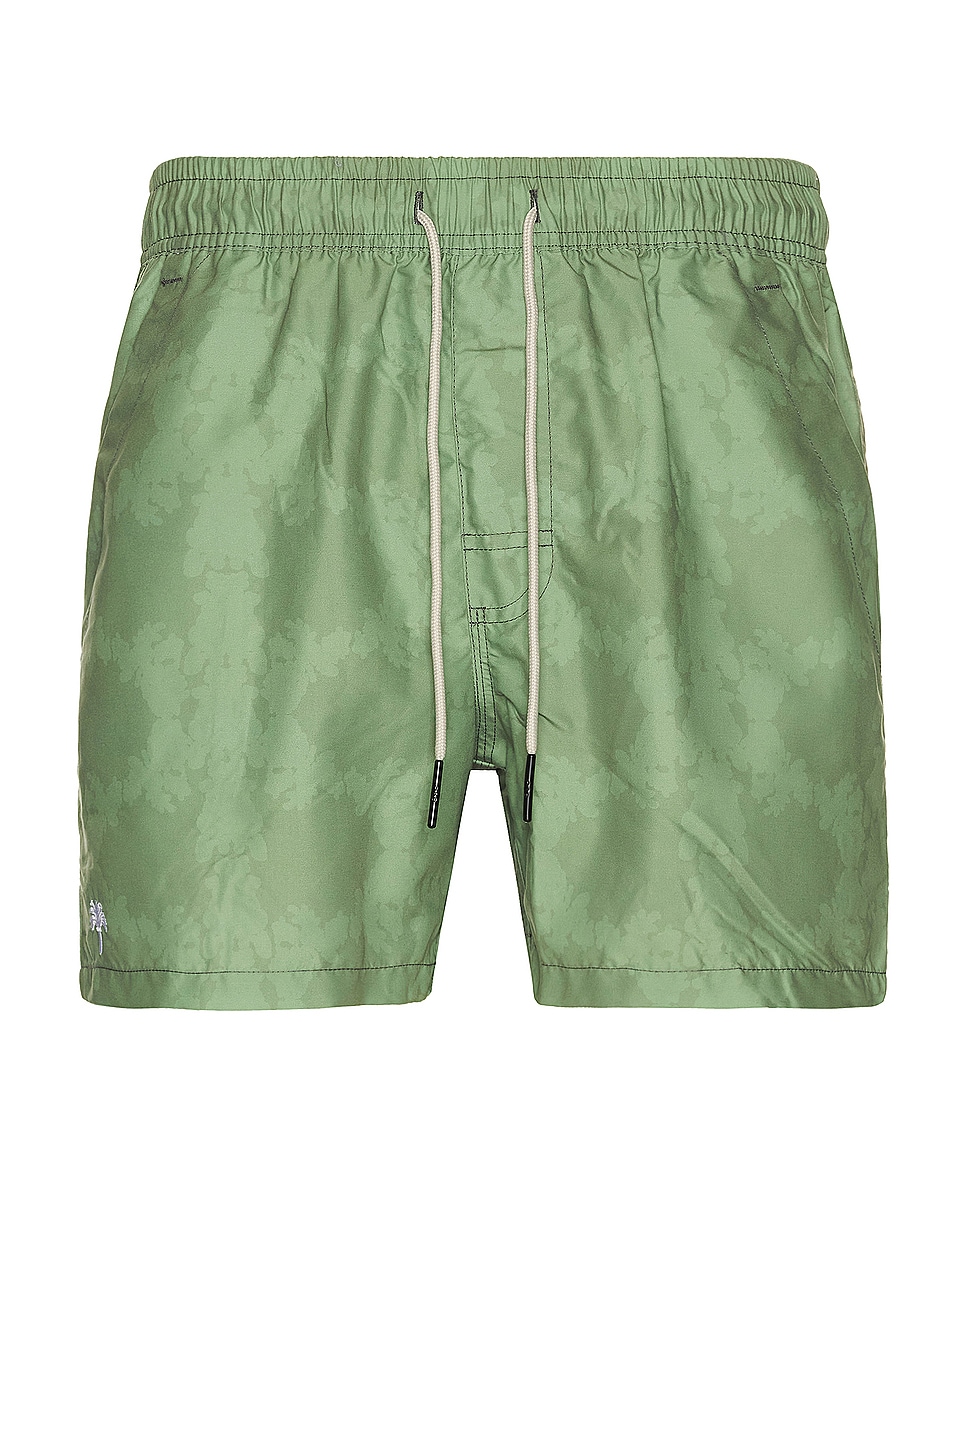 Image 1 of OAS Blurry Crown Swim Shorts in Green